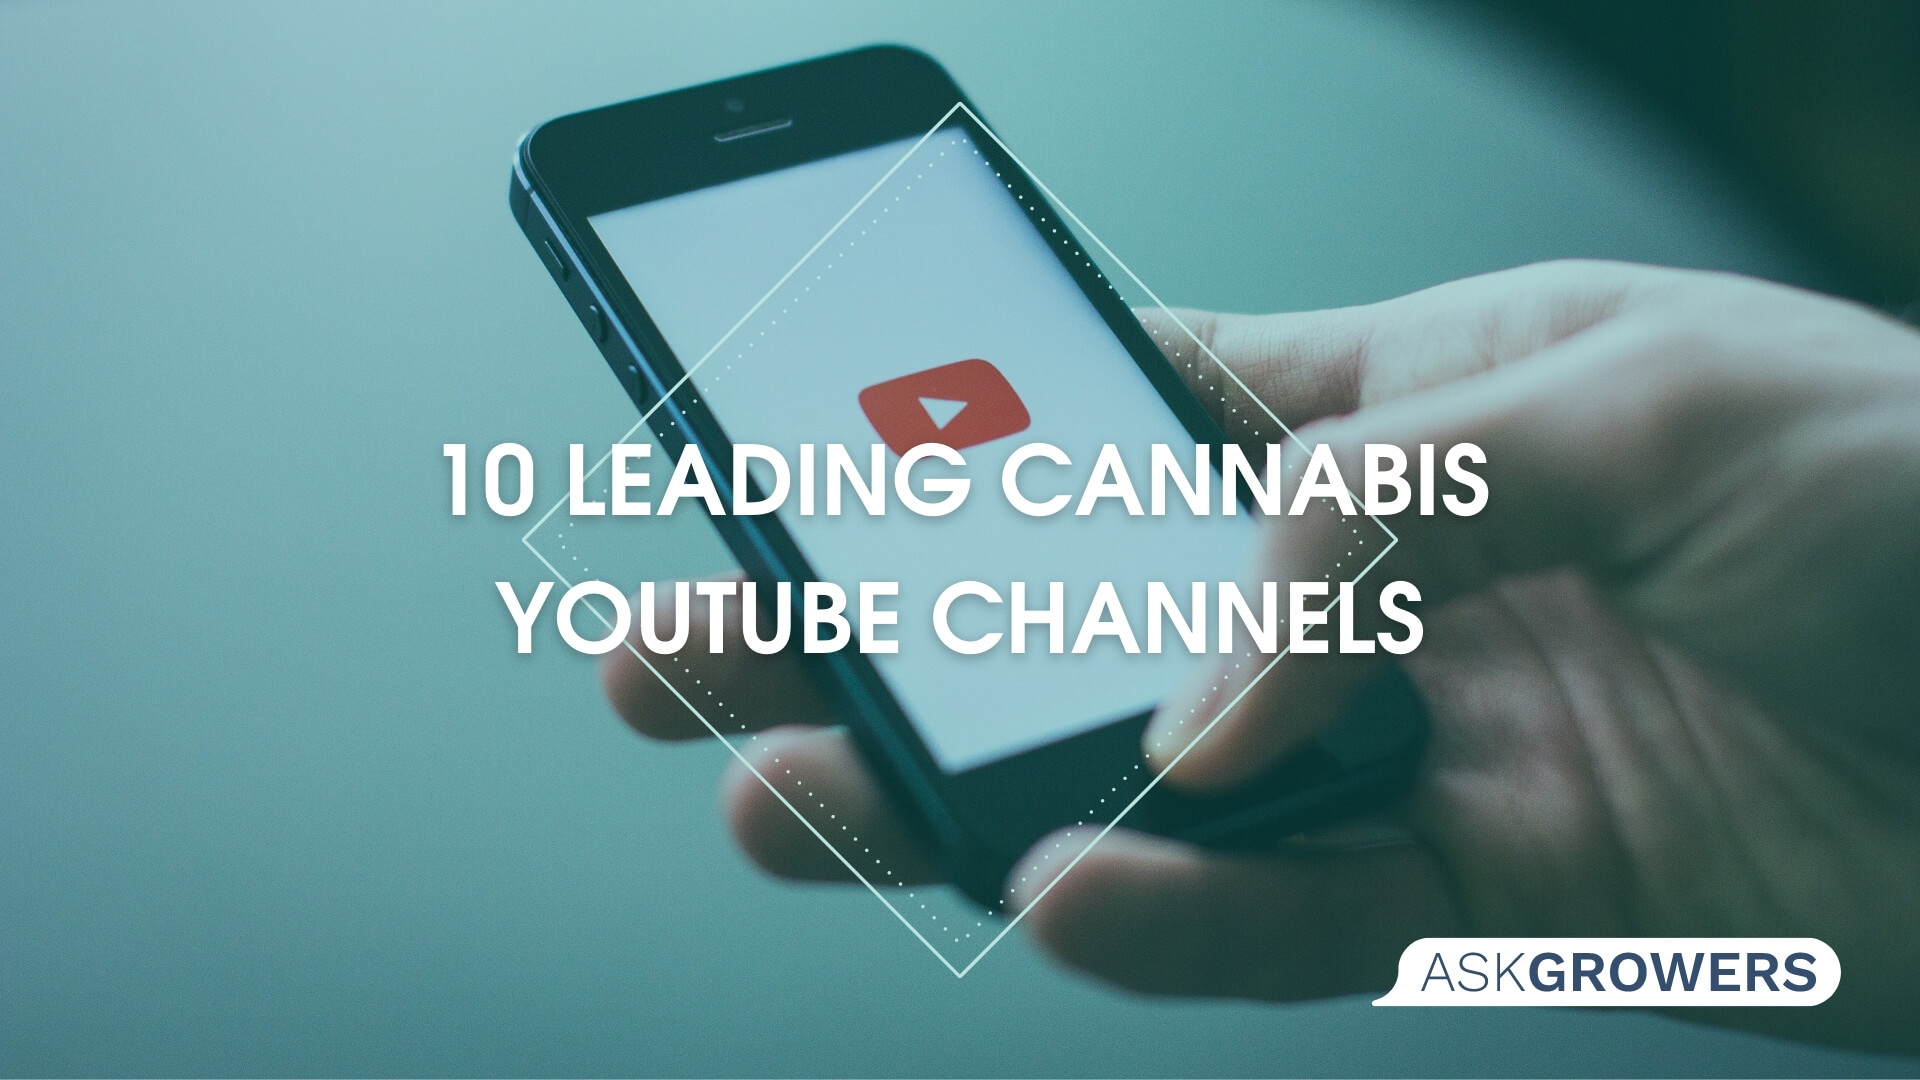 10 Leading Cannabis YouTube Channels